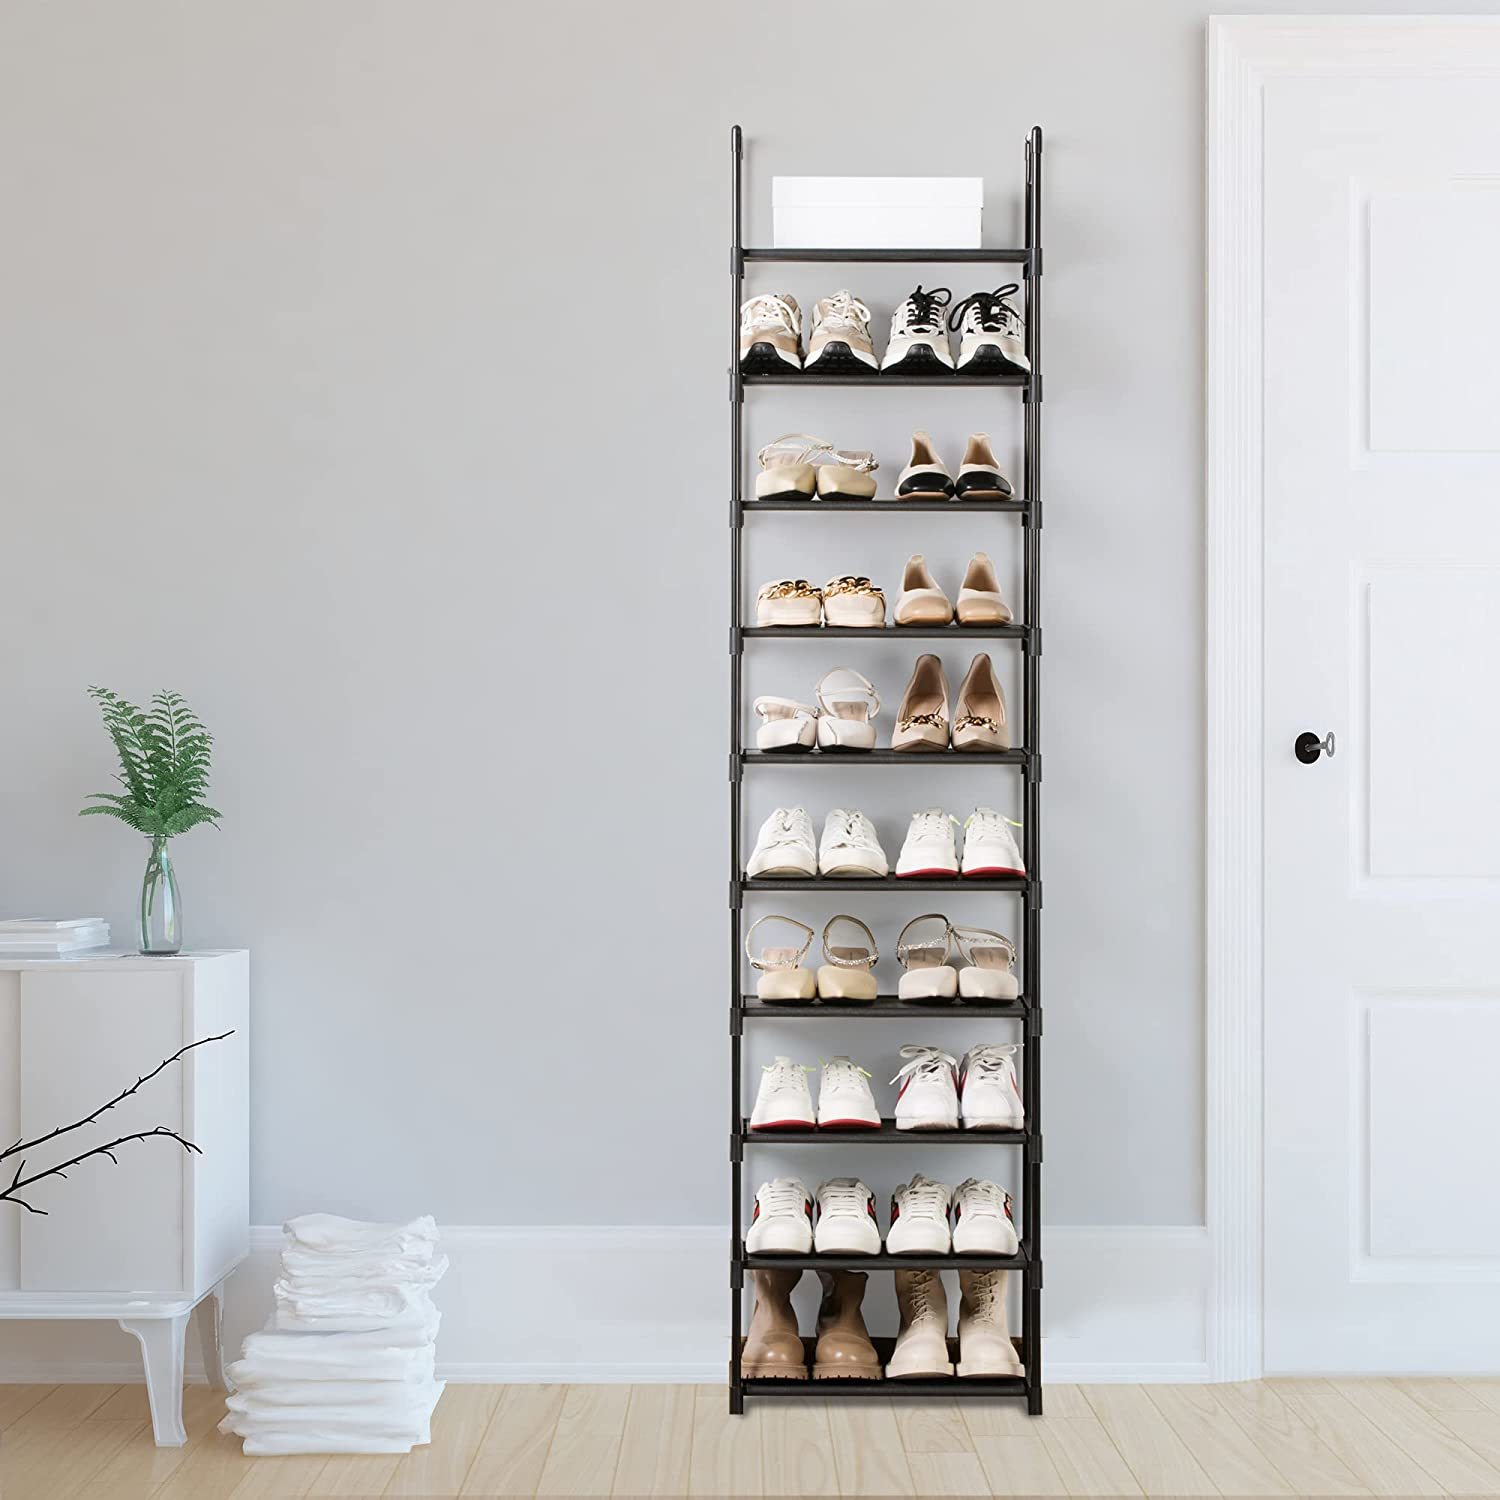 WEXCISE Large Shoe Rack Organizer 9 Tiers 4 Rows for 64-72 Pairs